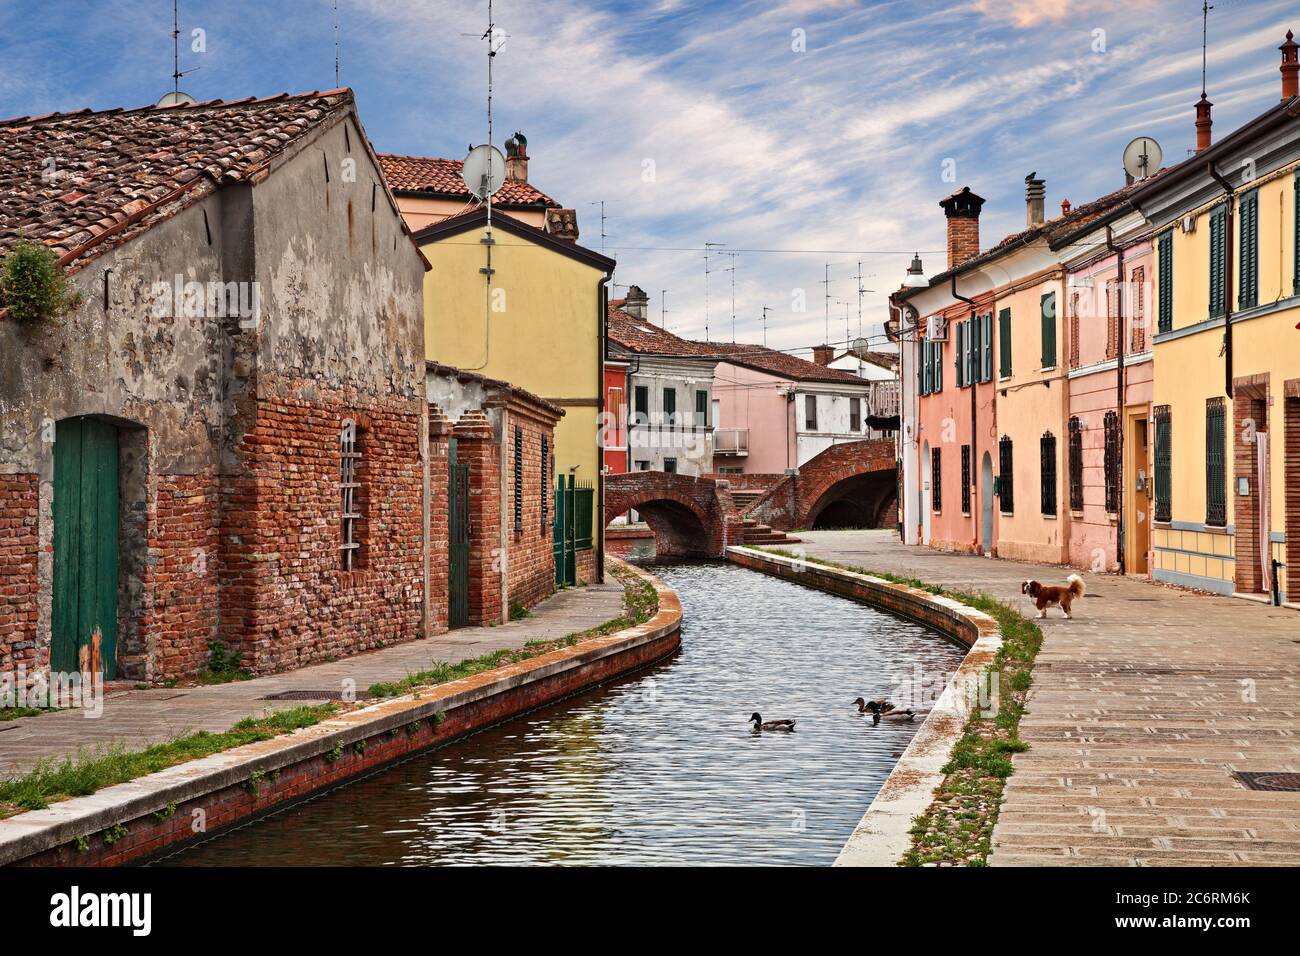 Comacchio, Ferrara, Emilia-Romagna, Italy: cityscape with colorful houses, canal and bridges in the old town known as Little Venice Stock Photo